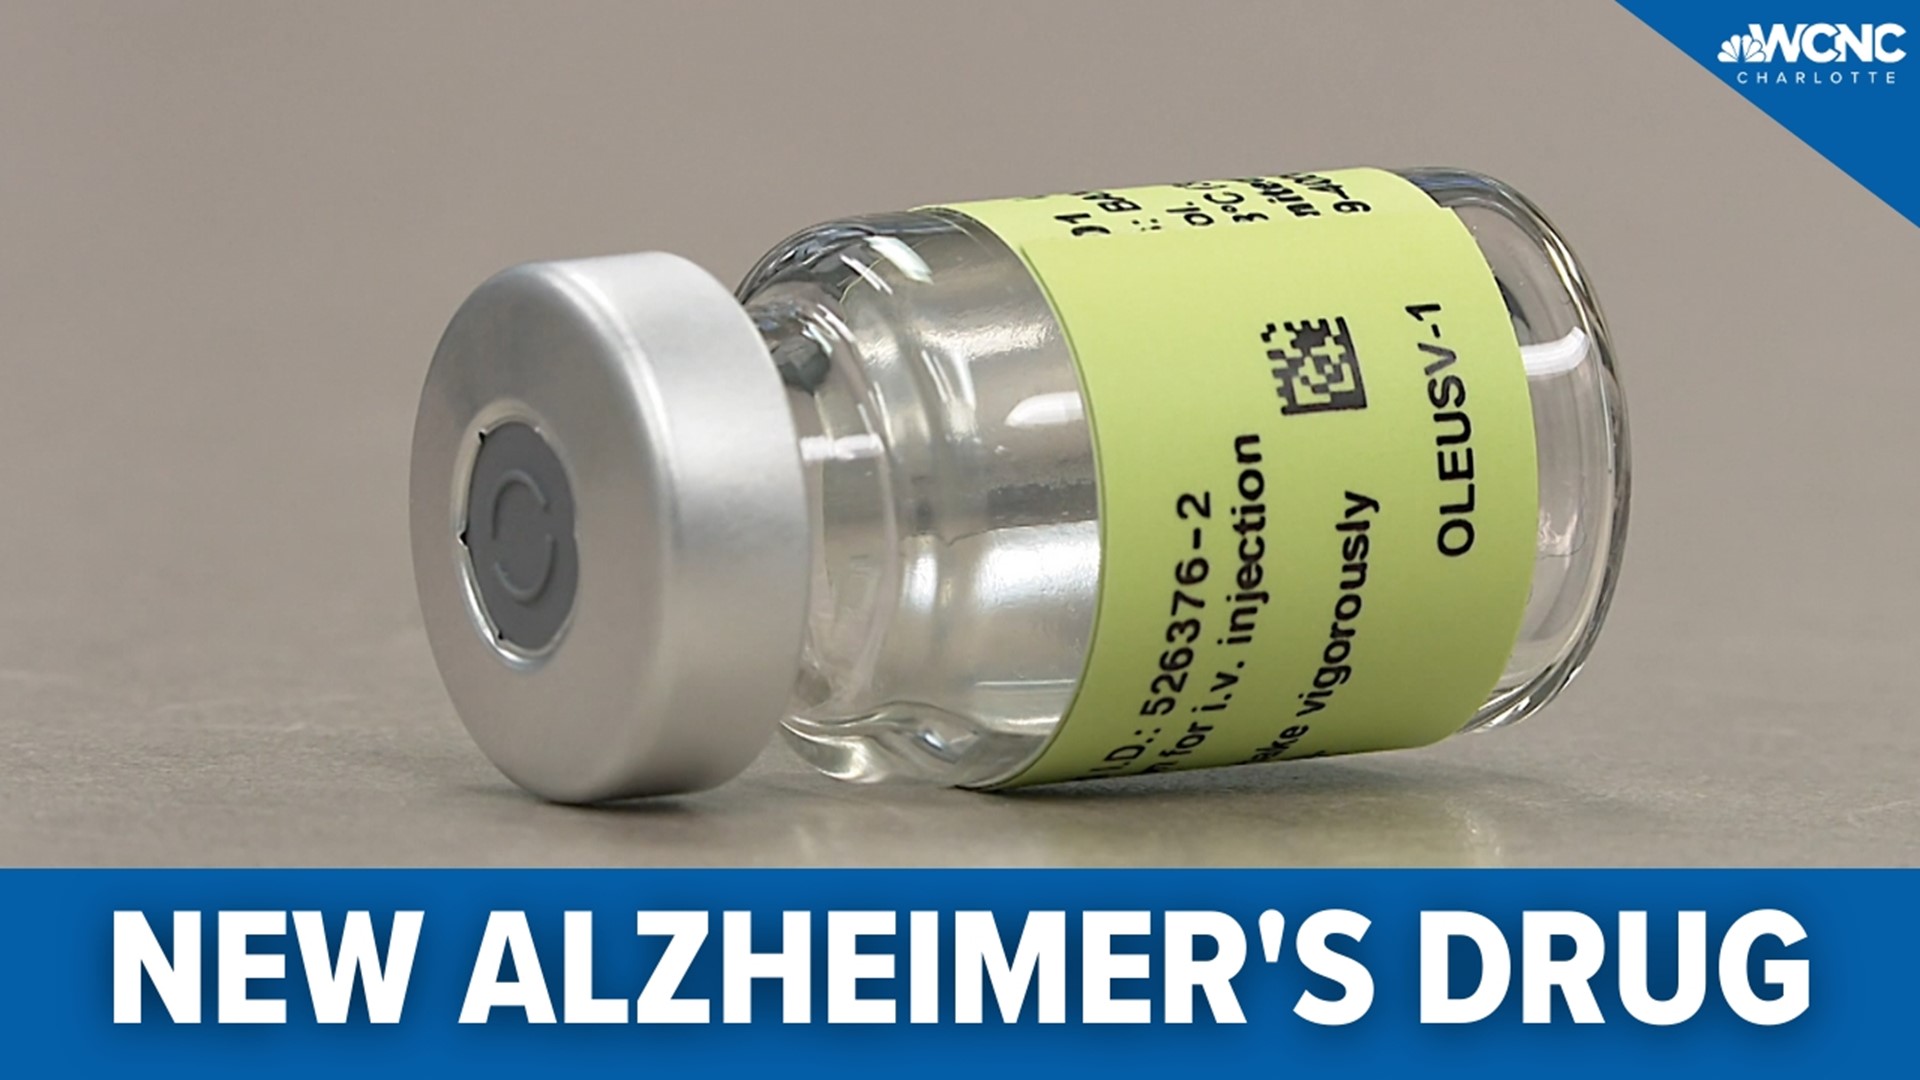 It's the first drug that’s been convincingly shown to slow the decline in memory and thinking that define Alzheimer's disease, but comes with potential risks.